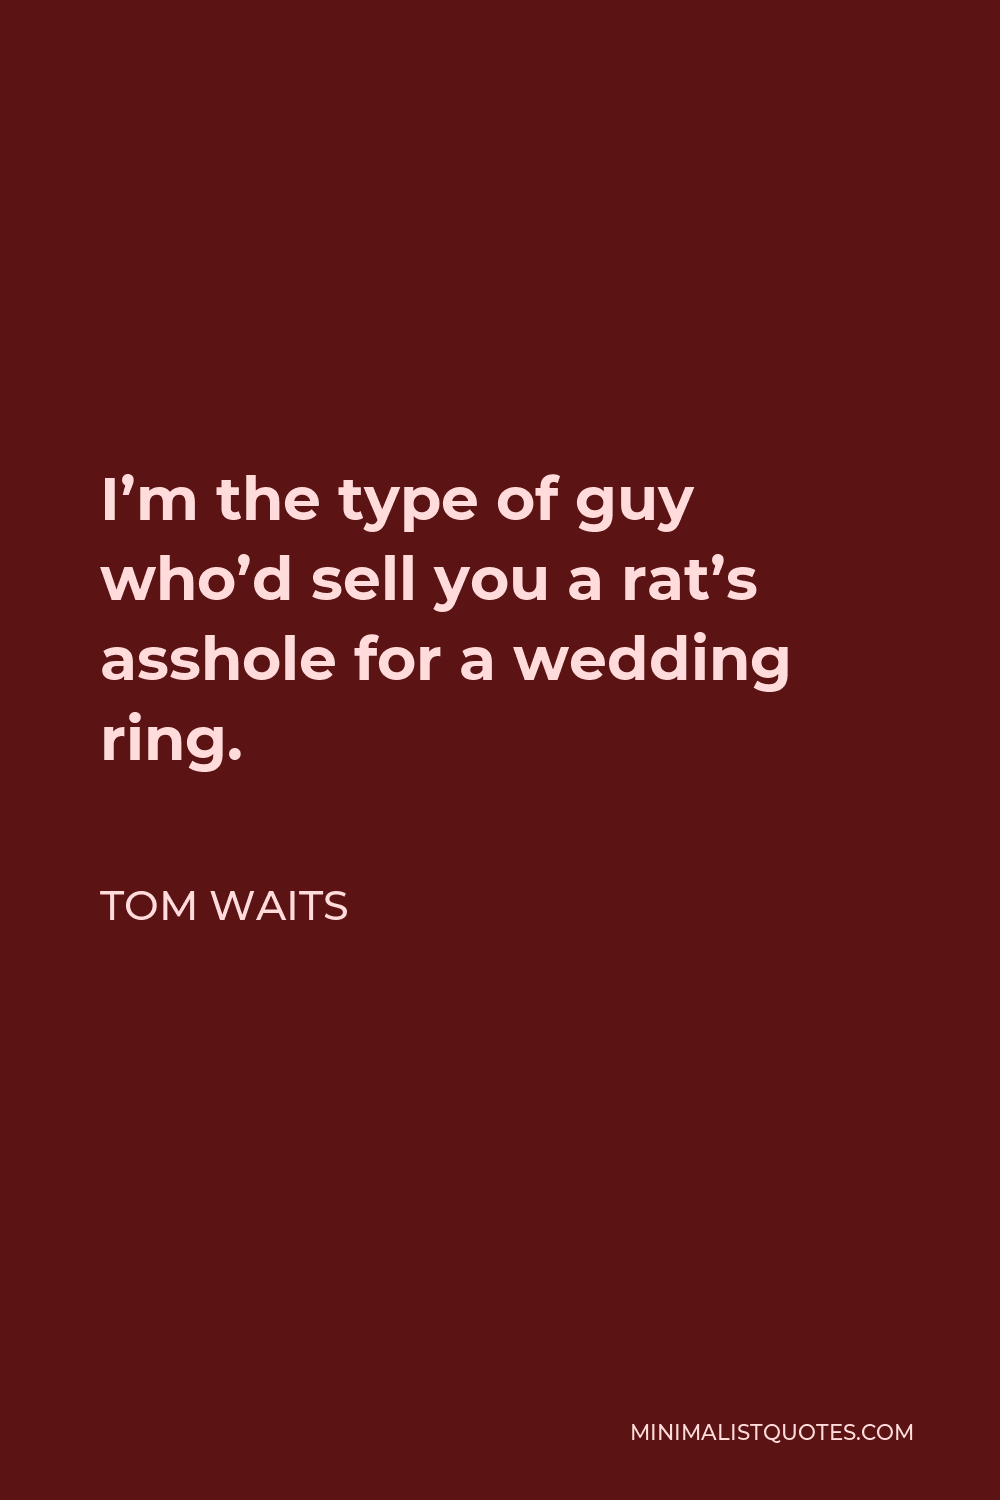 Tom Waits Quote - I’m the type of guy who’d sell you a rat’s asshole for a wedding ring.